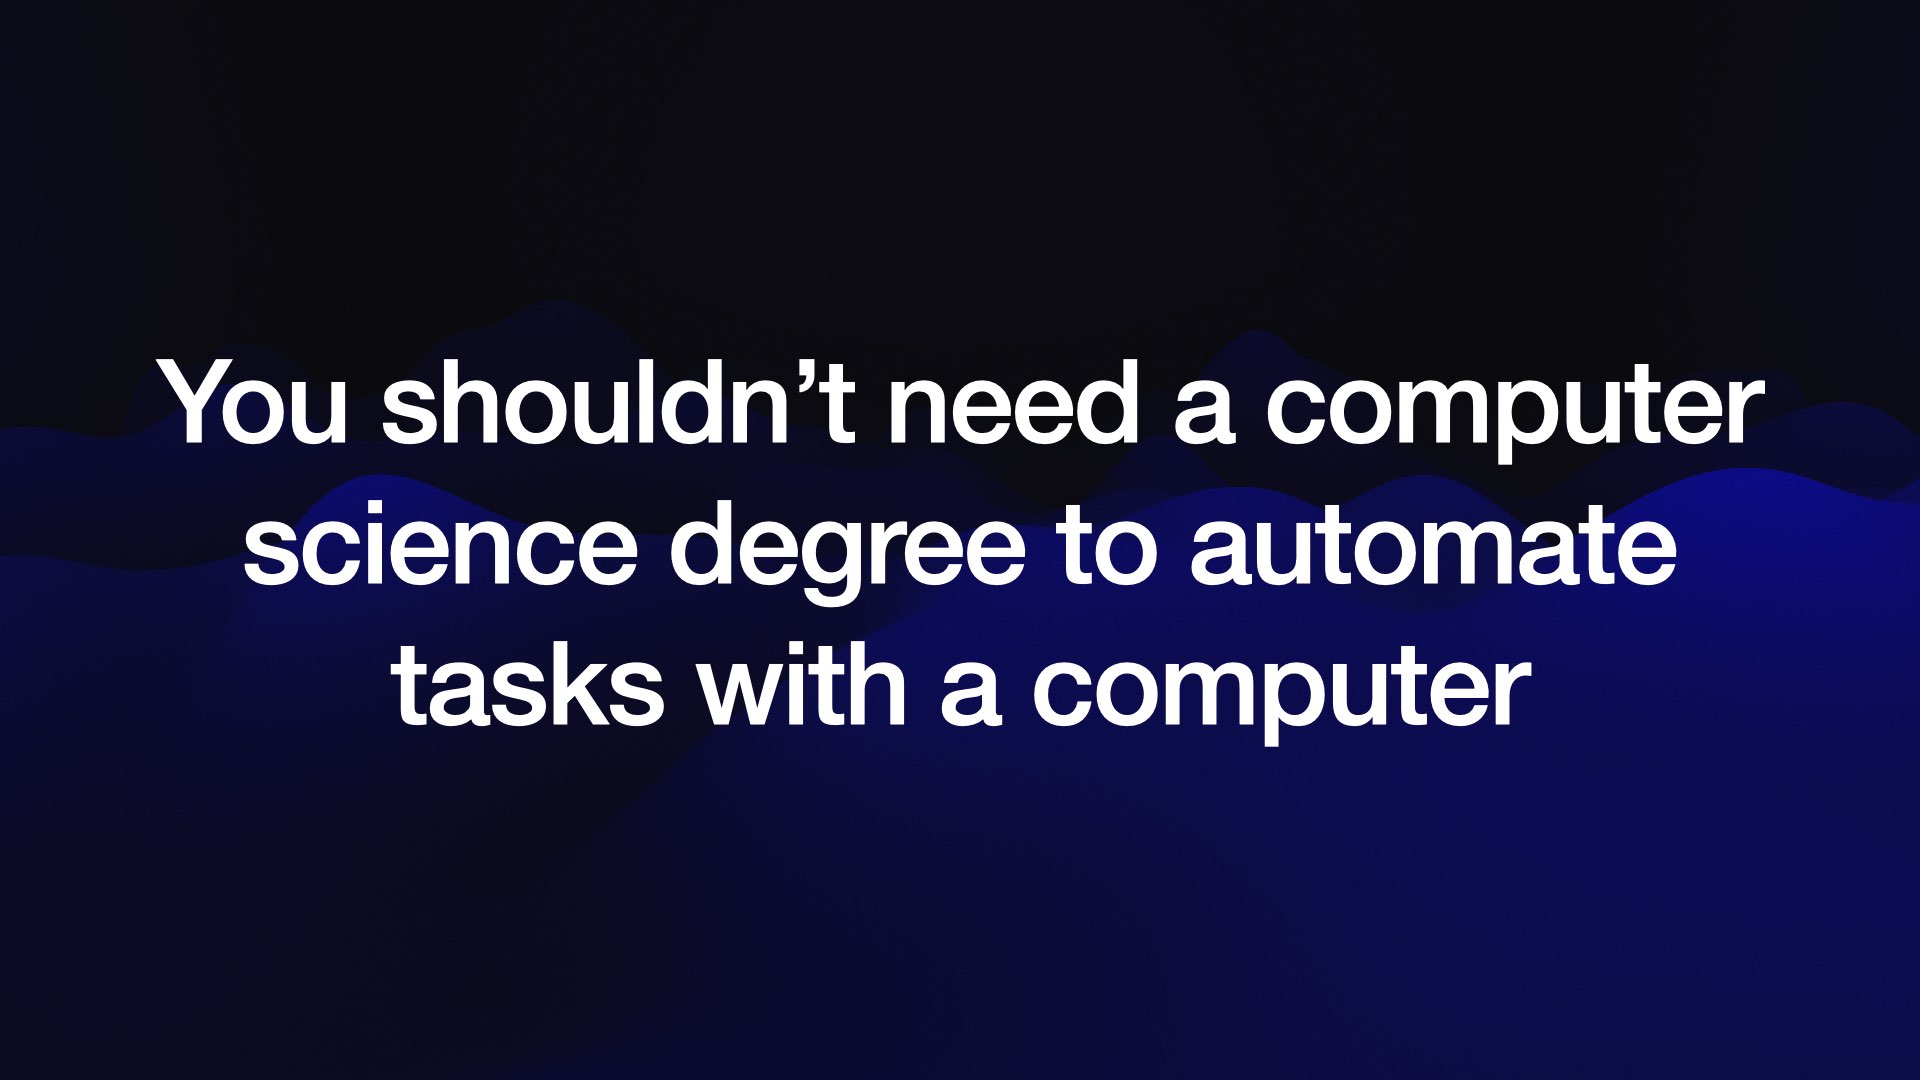 You shouldn’t need a computer science degree to automate tasks with a computer 